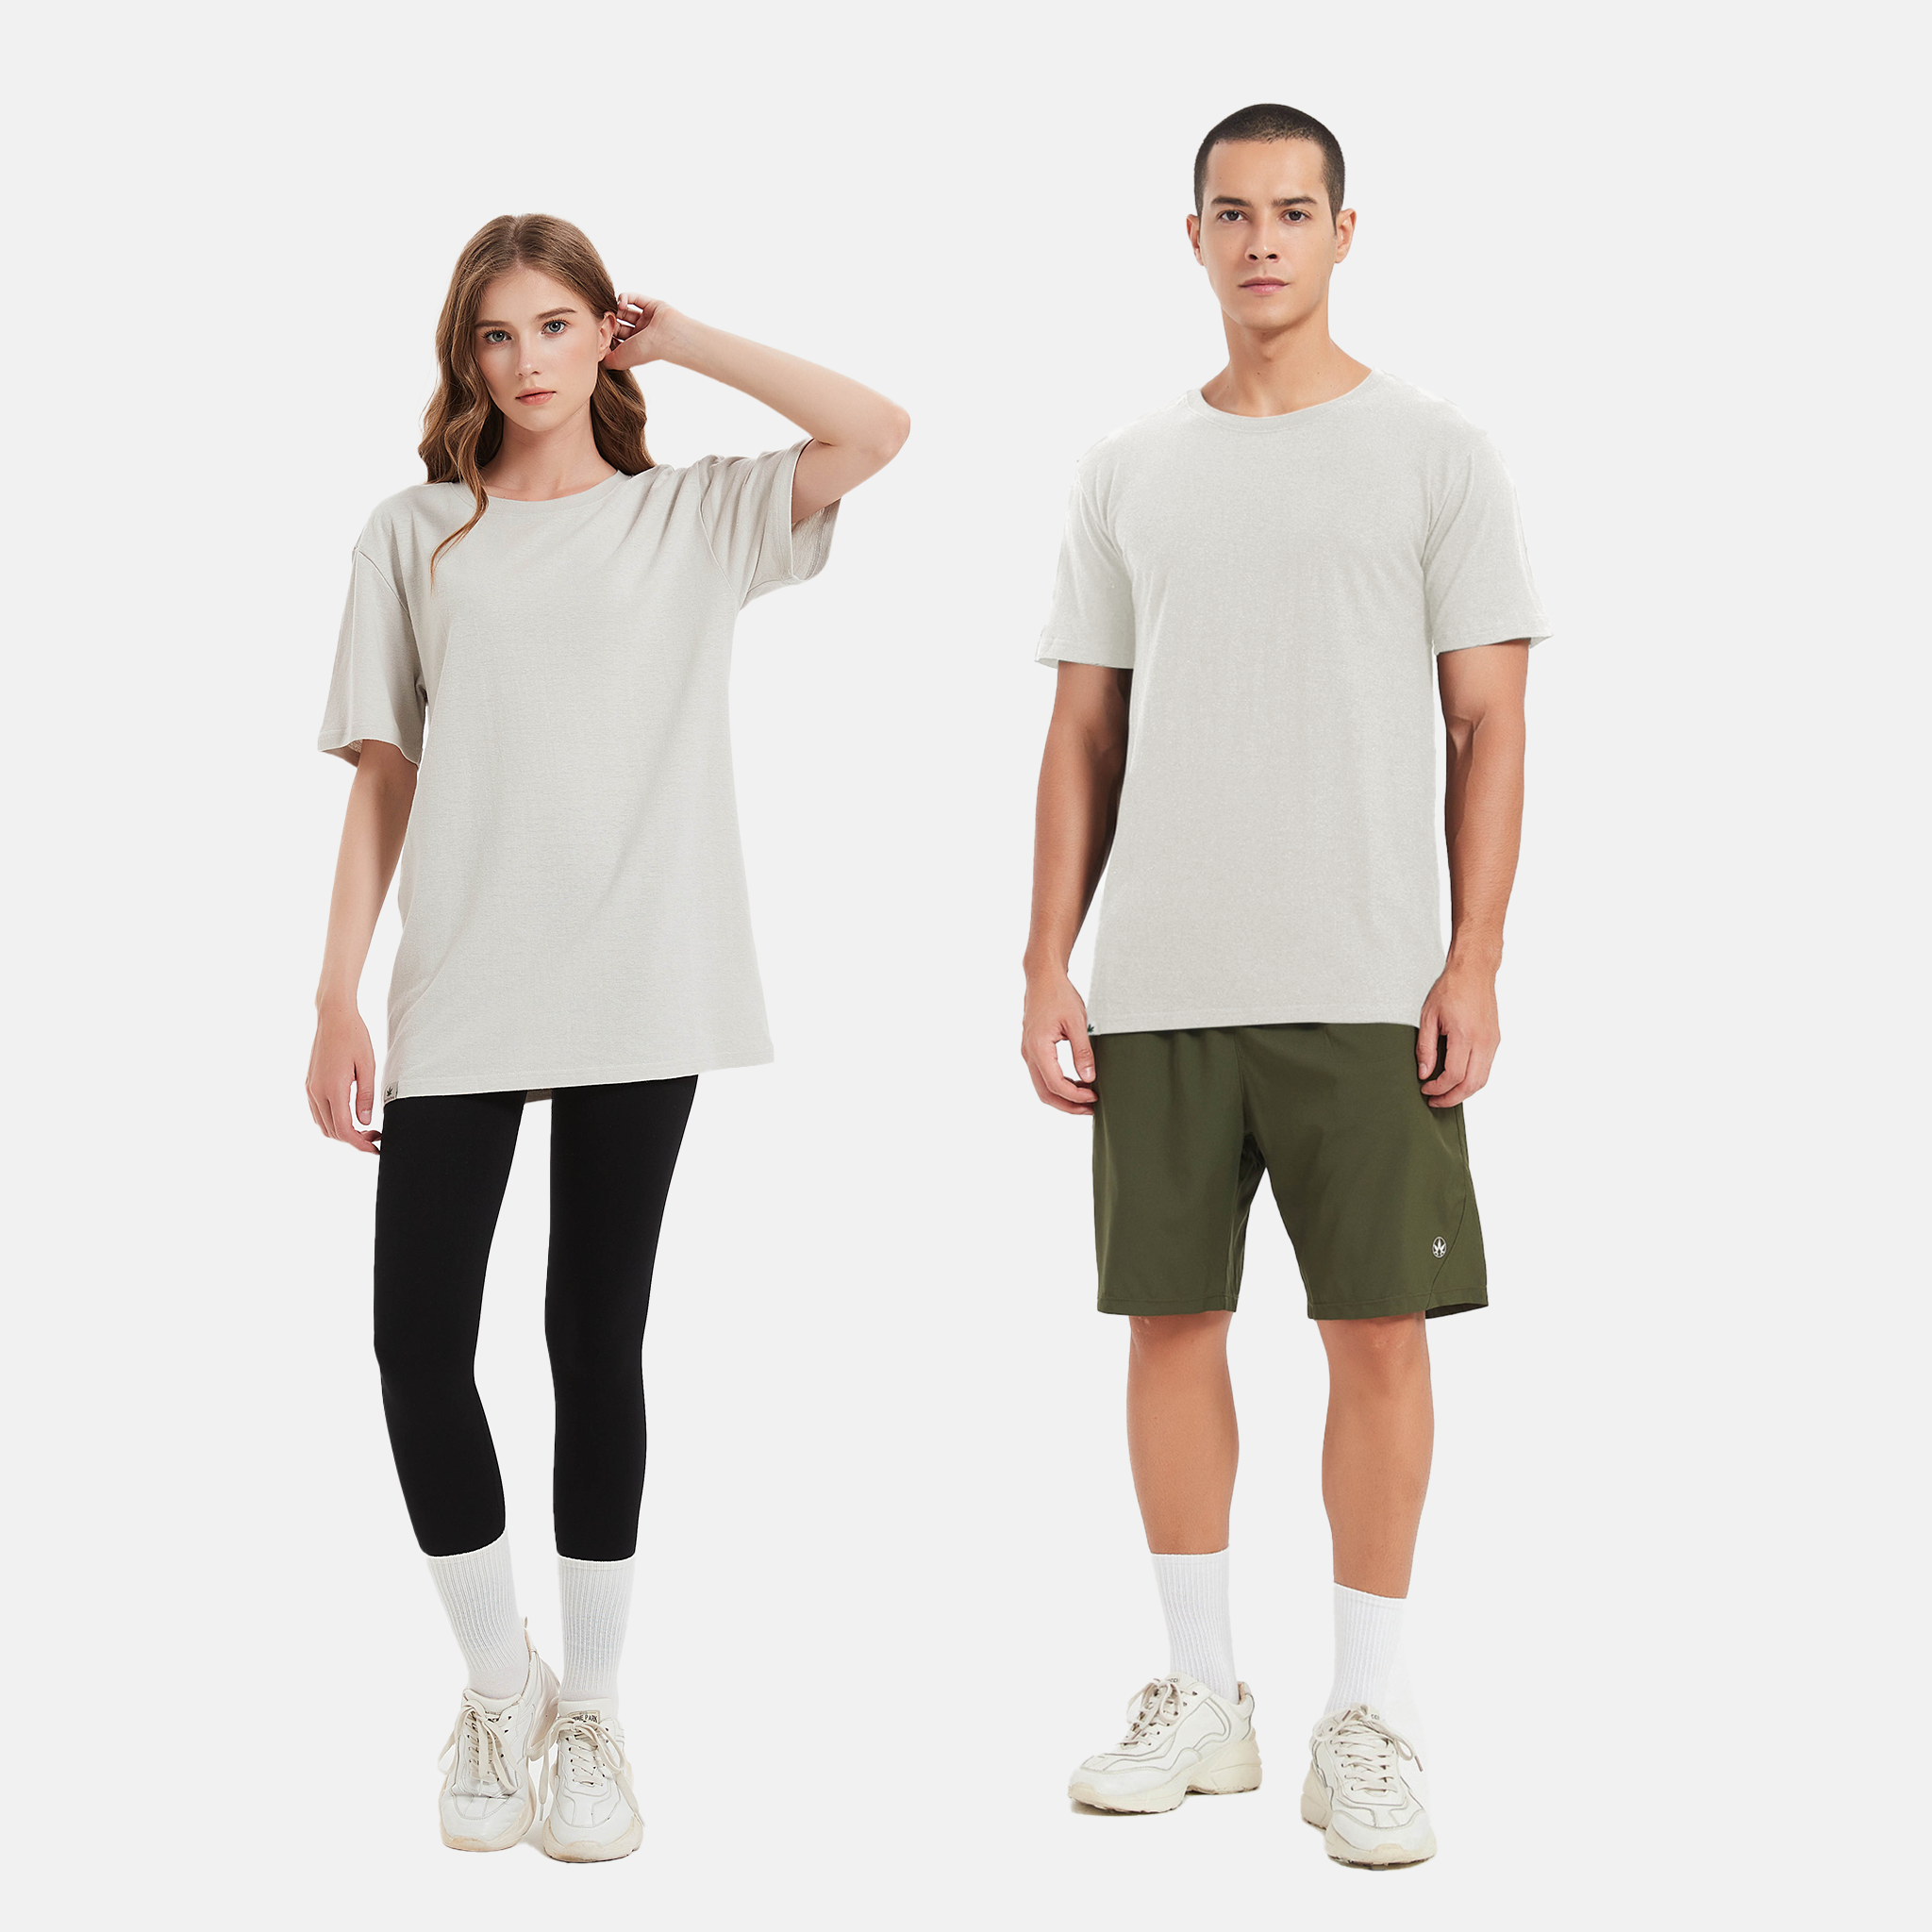 Sustainable style gray t-shirt made with eco-friendly materials, Mens, Womens